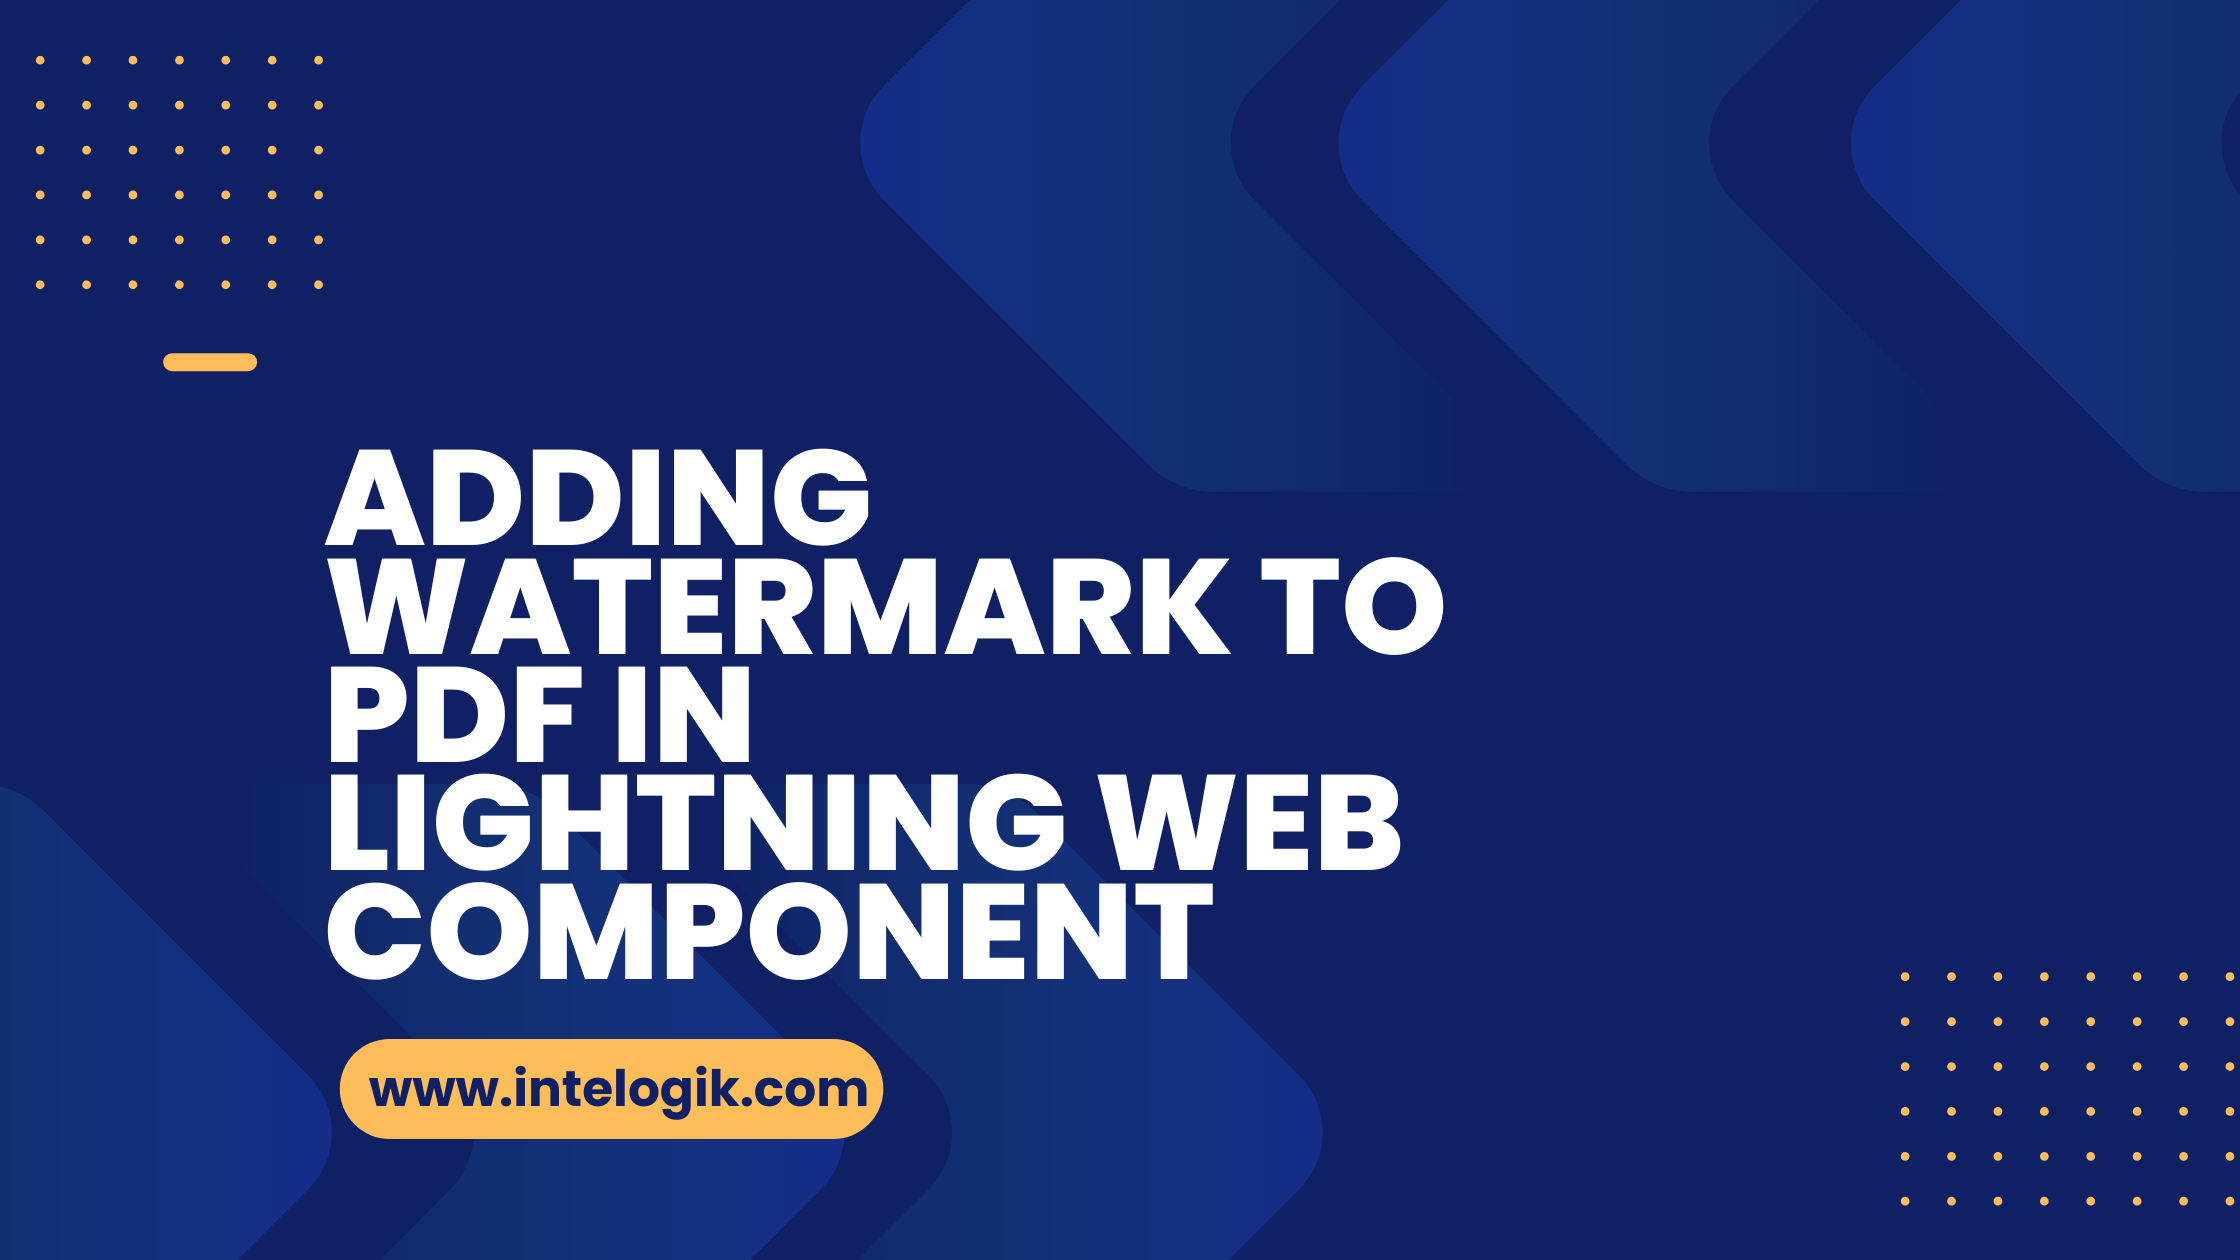 Adding Watermark to PDF In Lightning Web Component